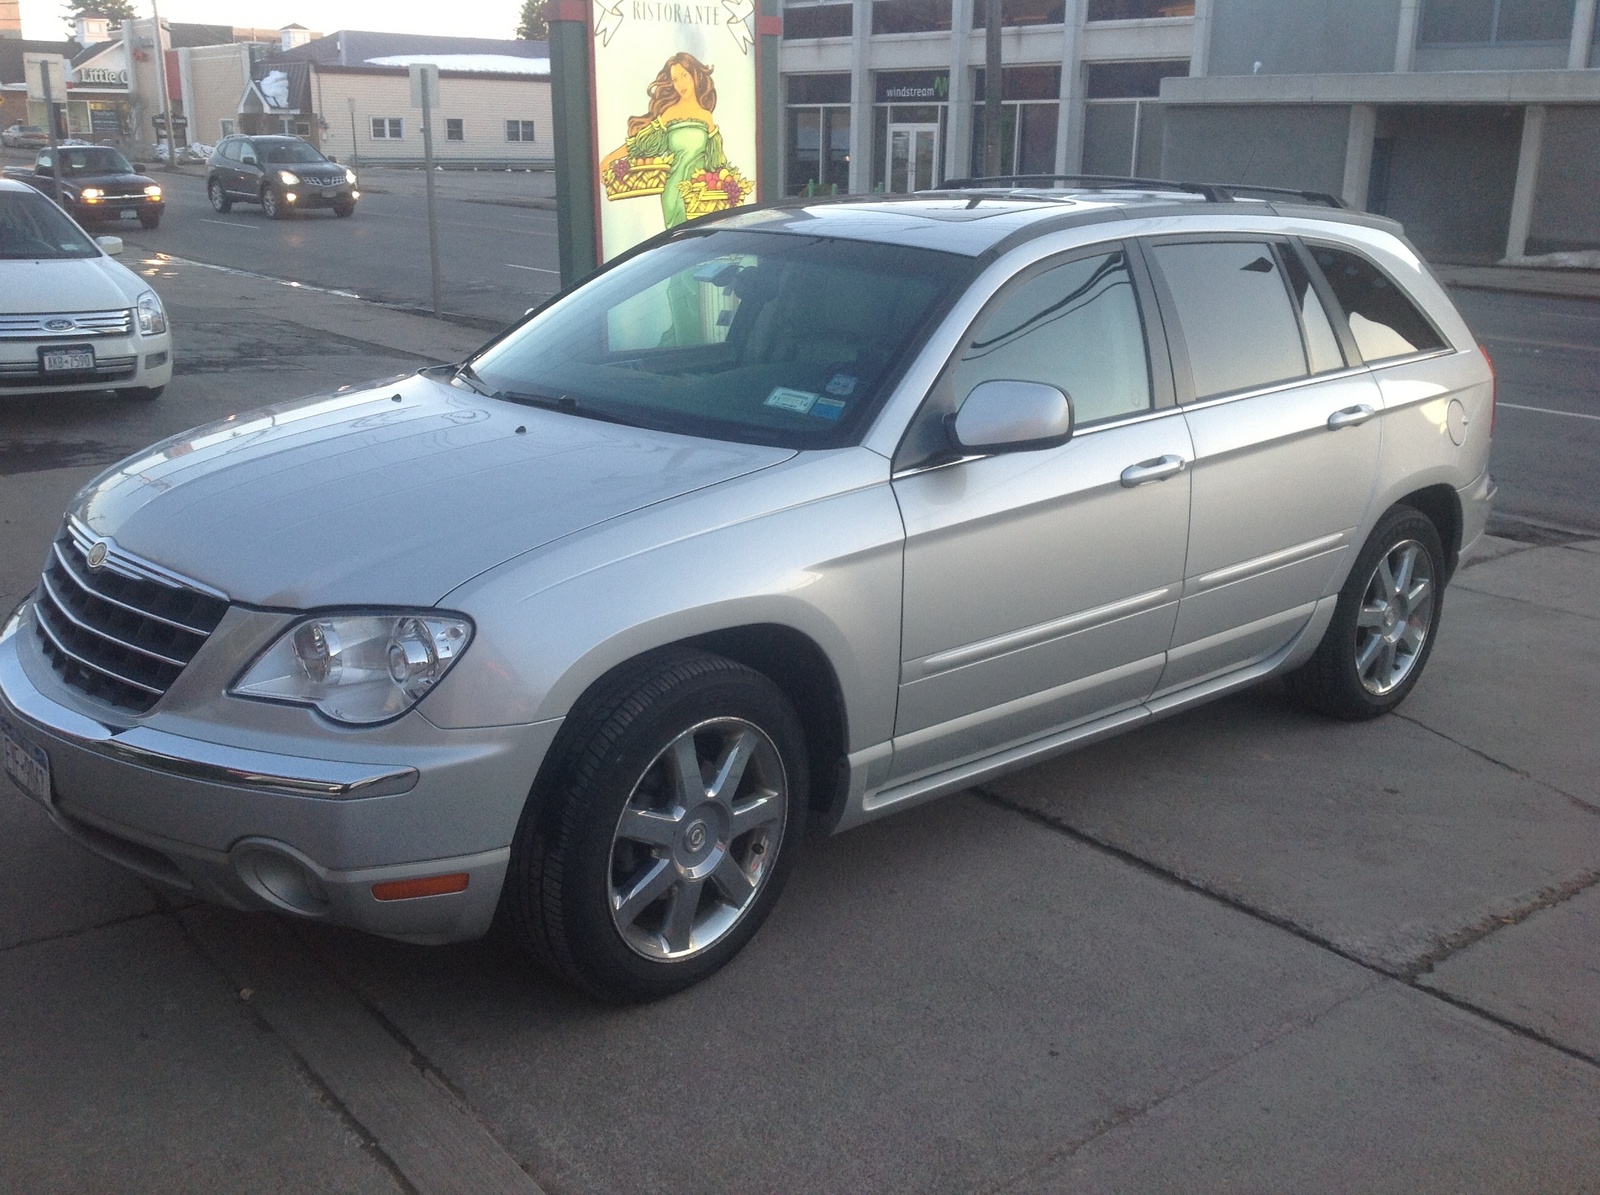 Used 2007 chrysler pacifica limited #4